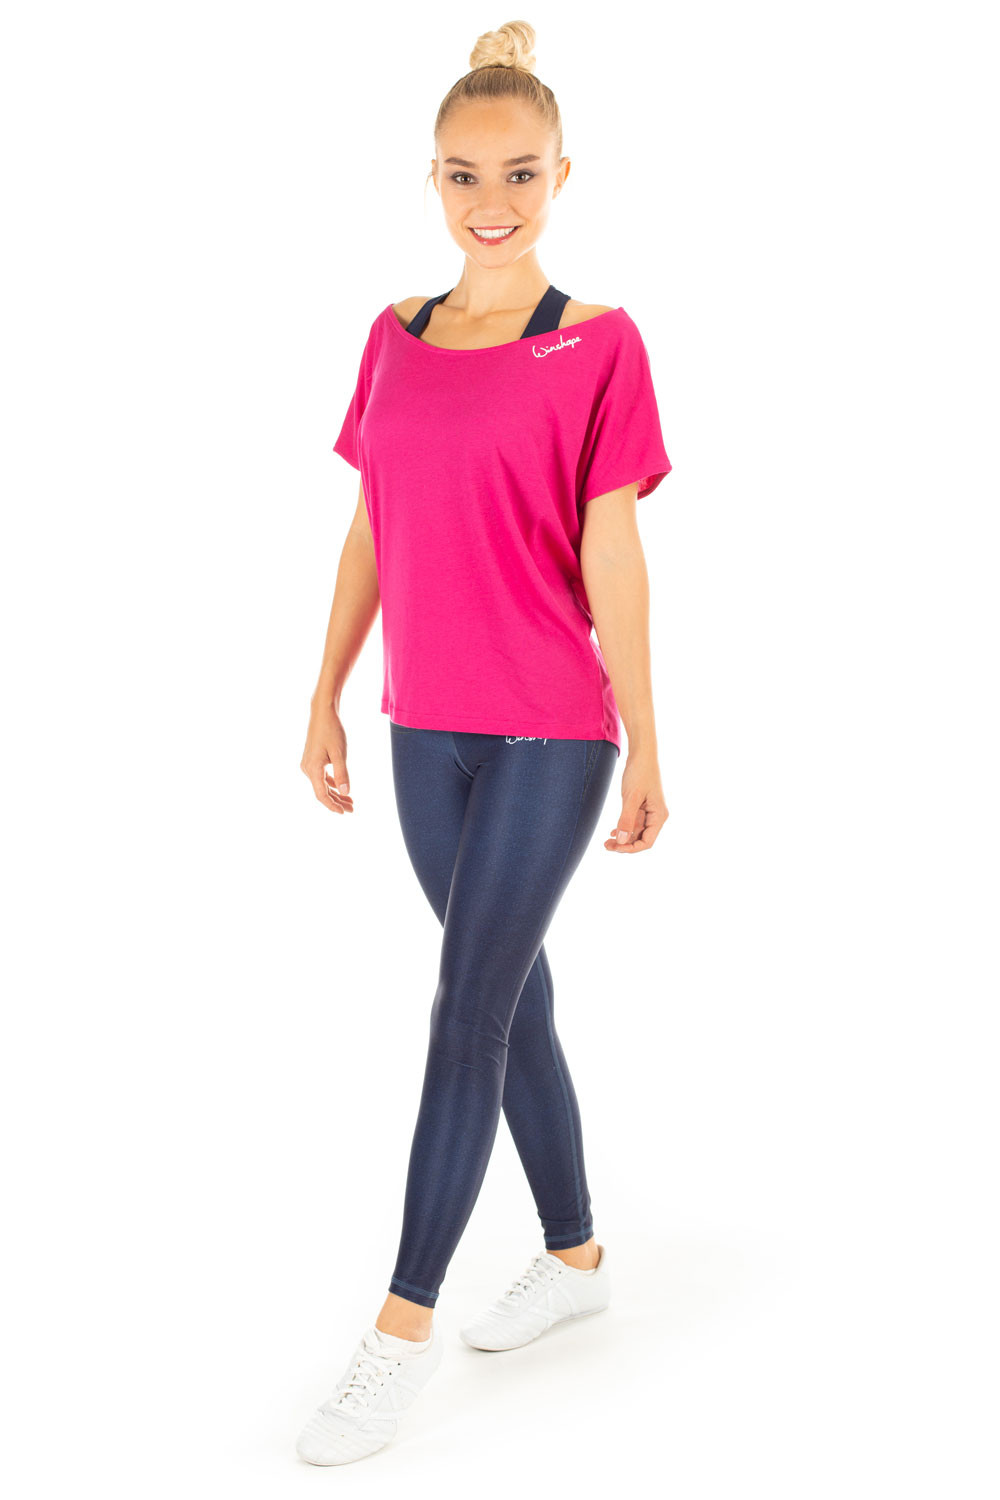 Functional Power Shape Jeans Tights “Bootylicious”AEL102, rich blue,  Winshape Slim Style